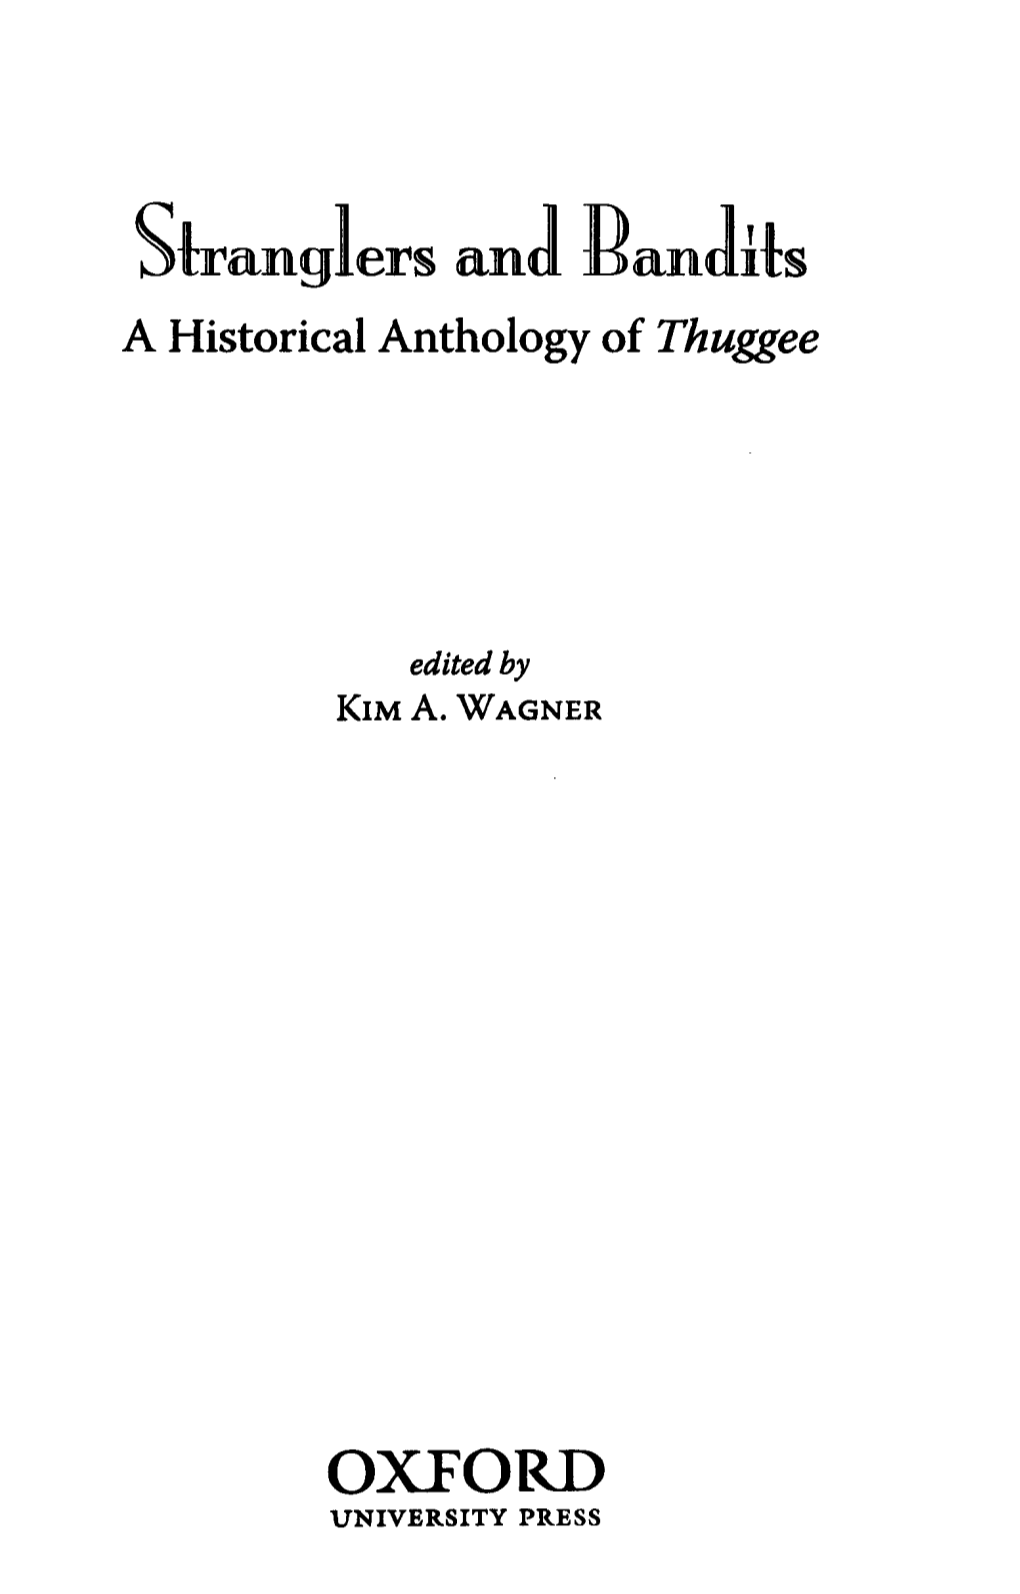 Stranglers and Bandits a Historical Anthology of Thuggee